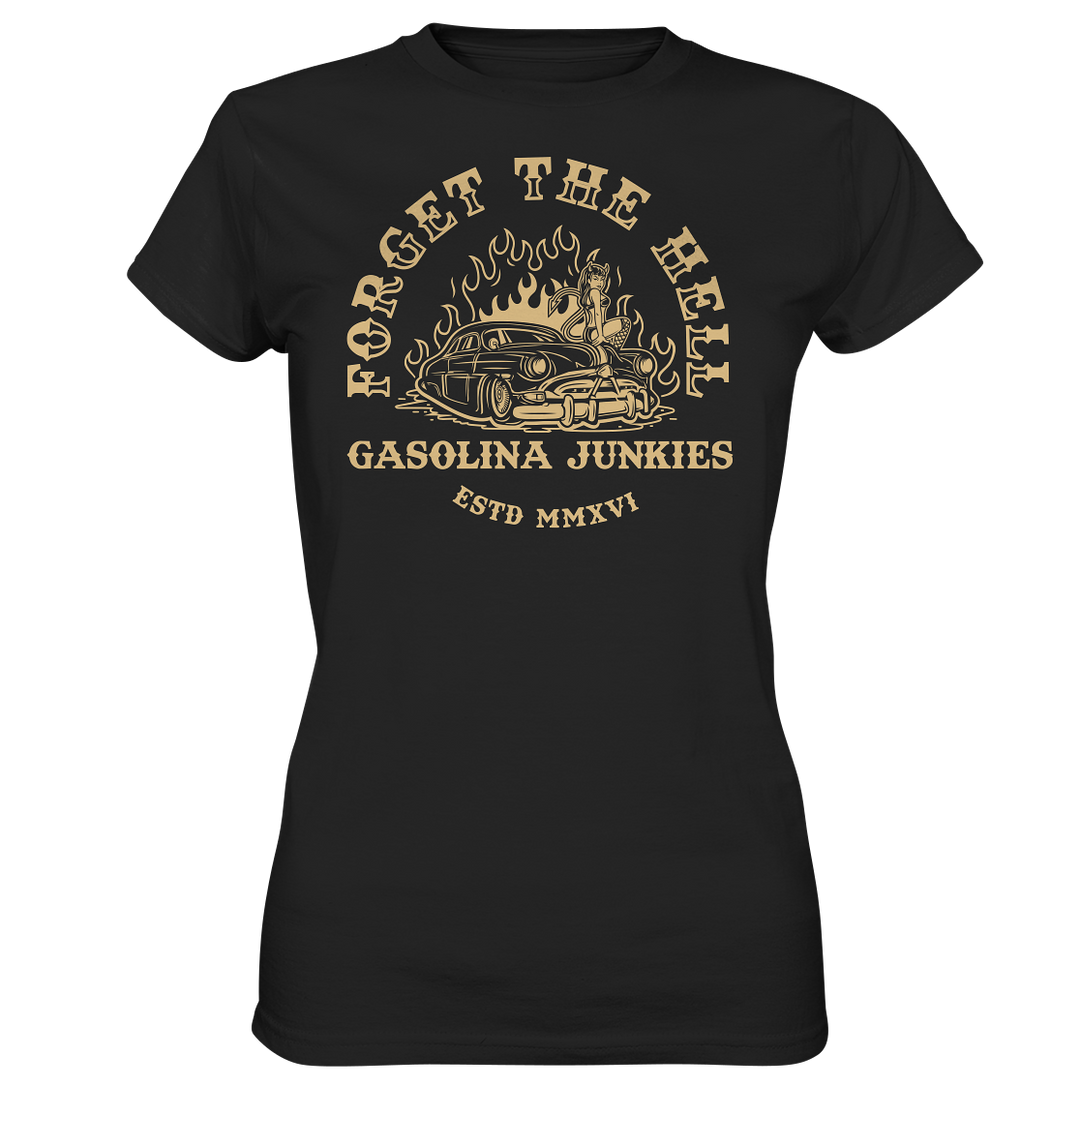 Forget the hell - Ladies Premium Shirt